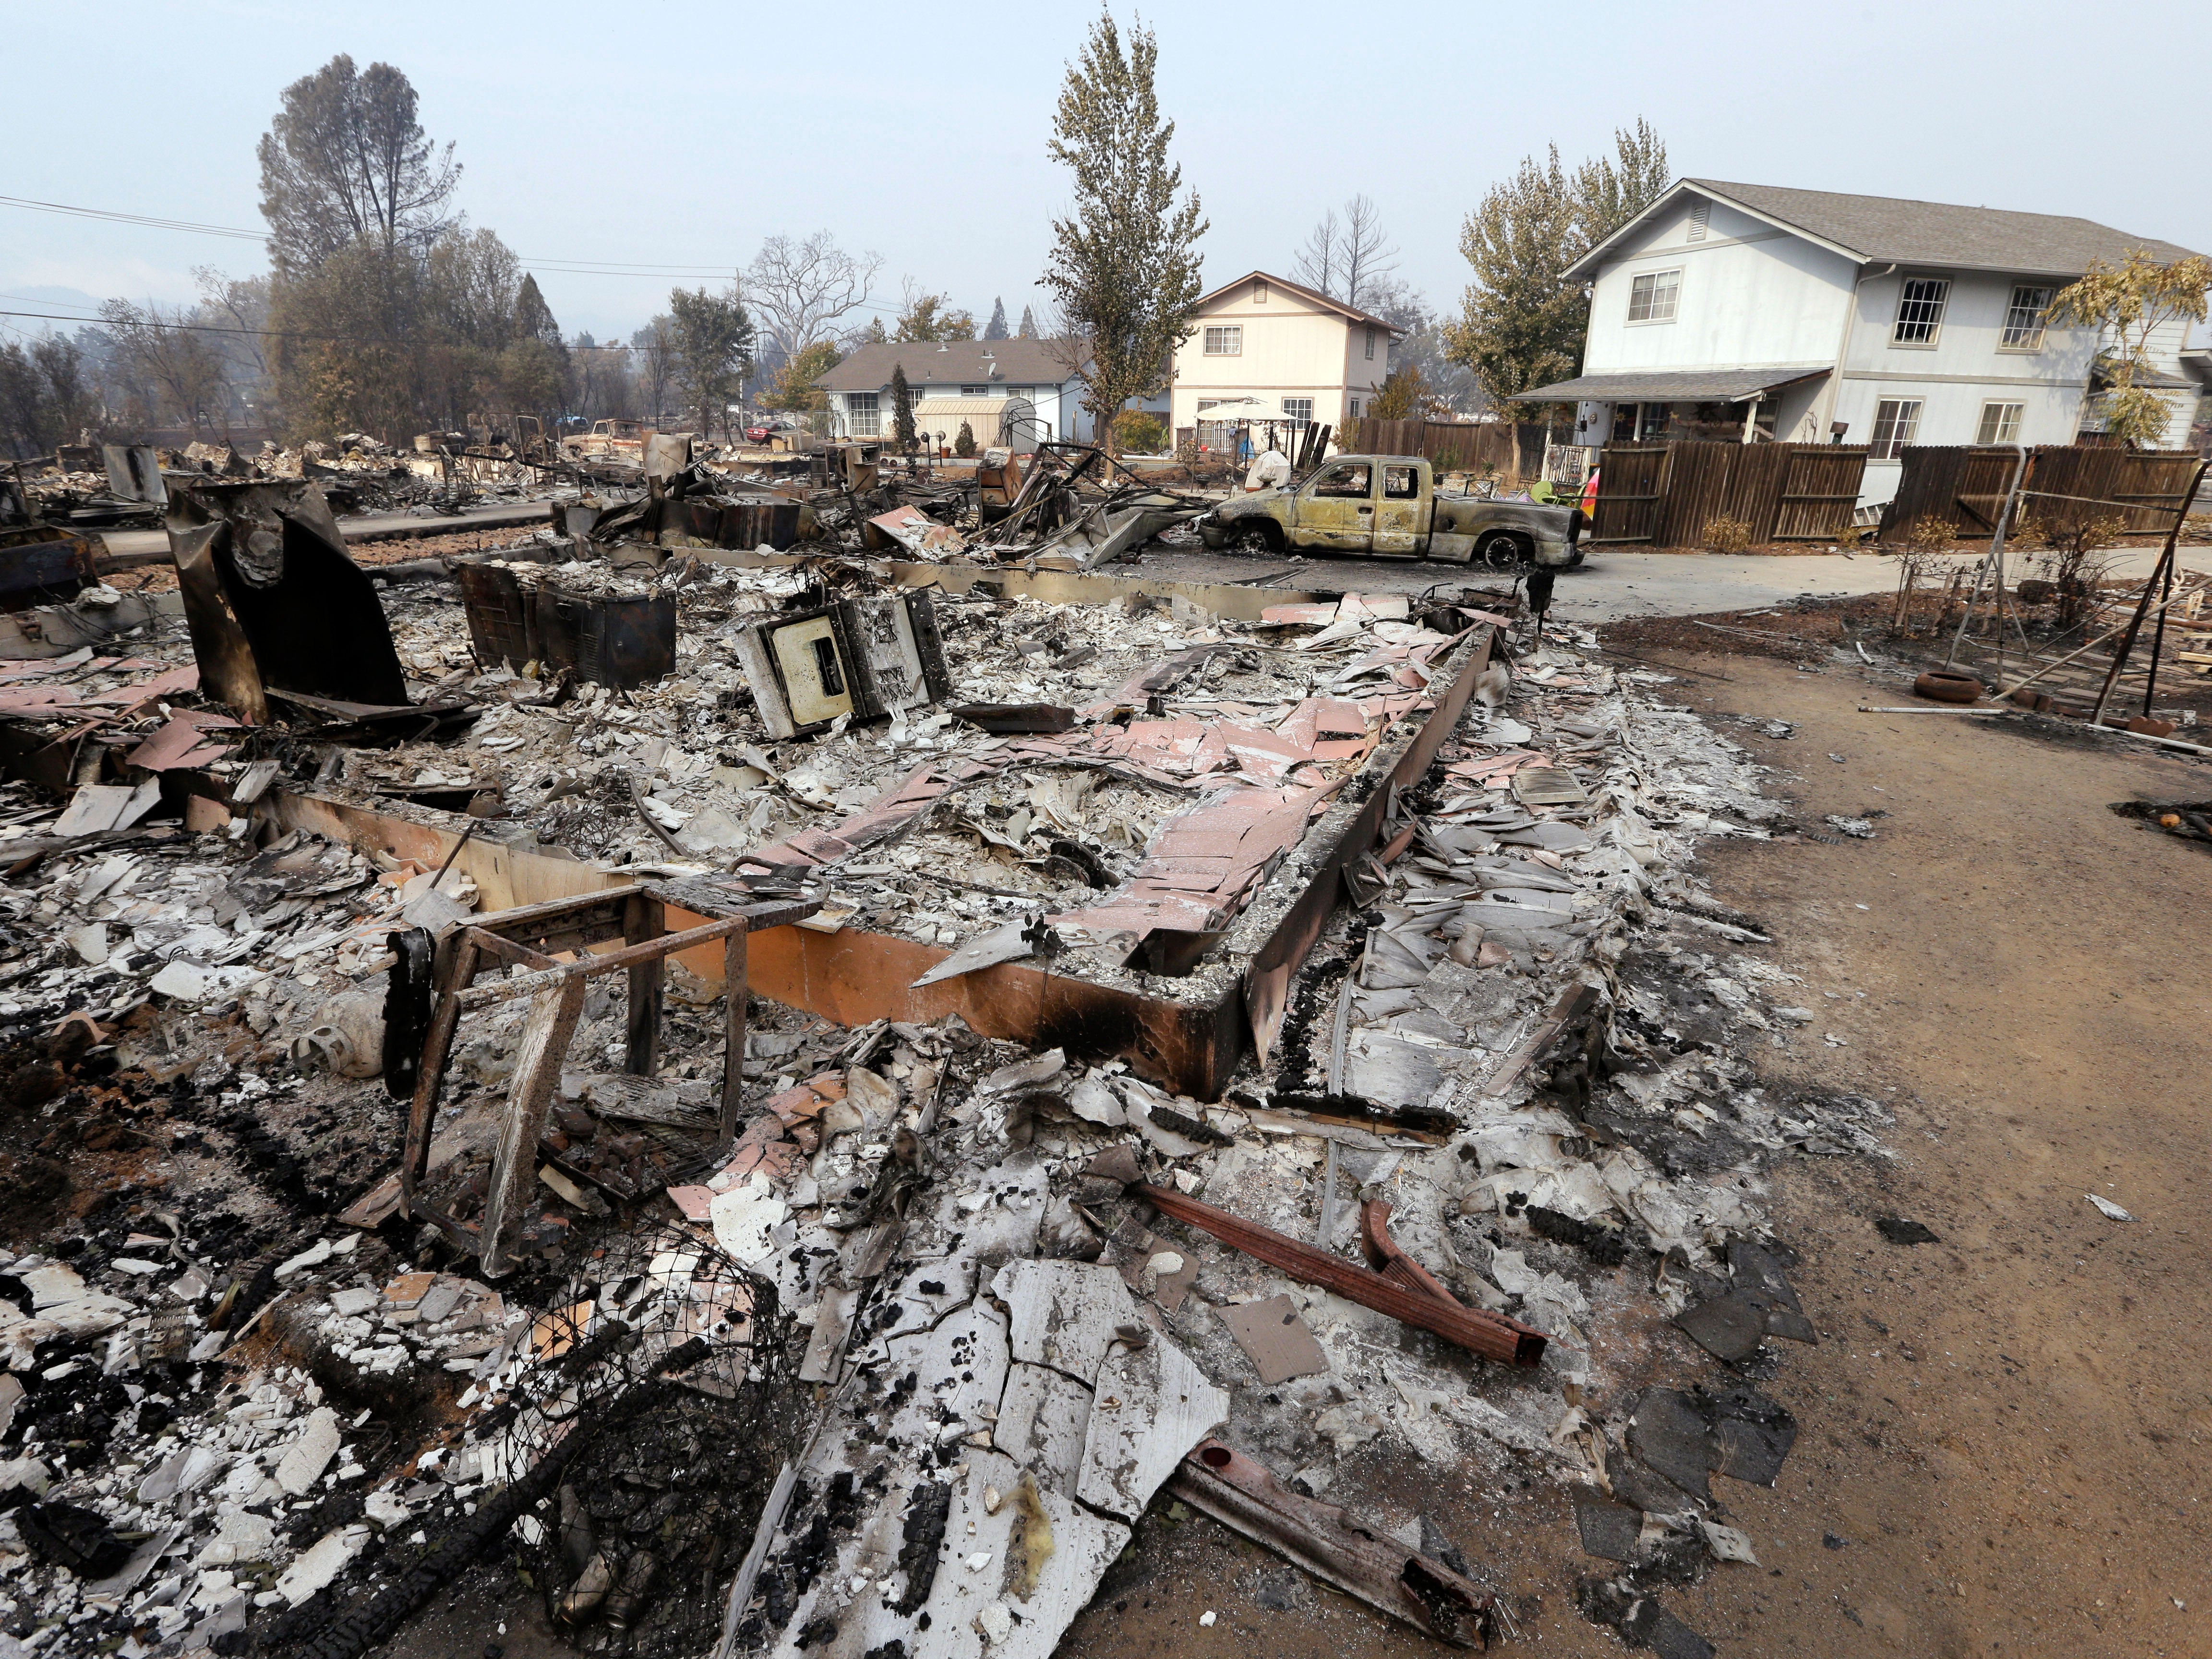 Houses destroyed in the wildfire Middletown, California